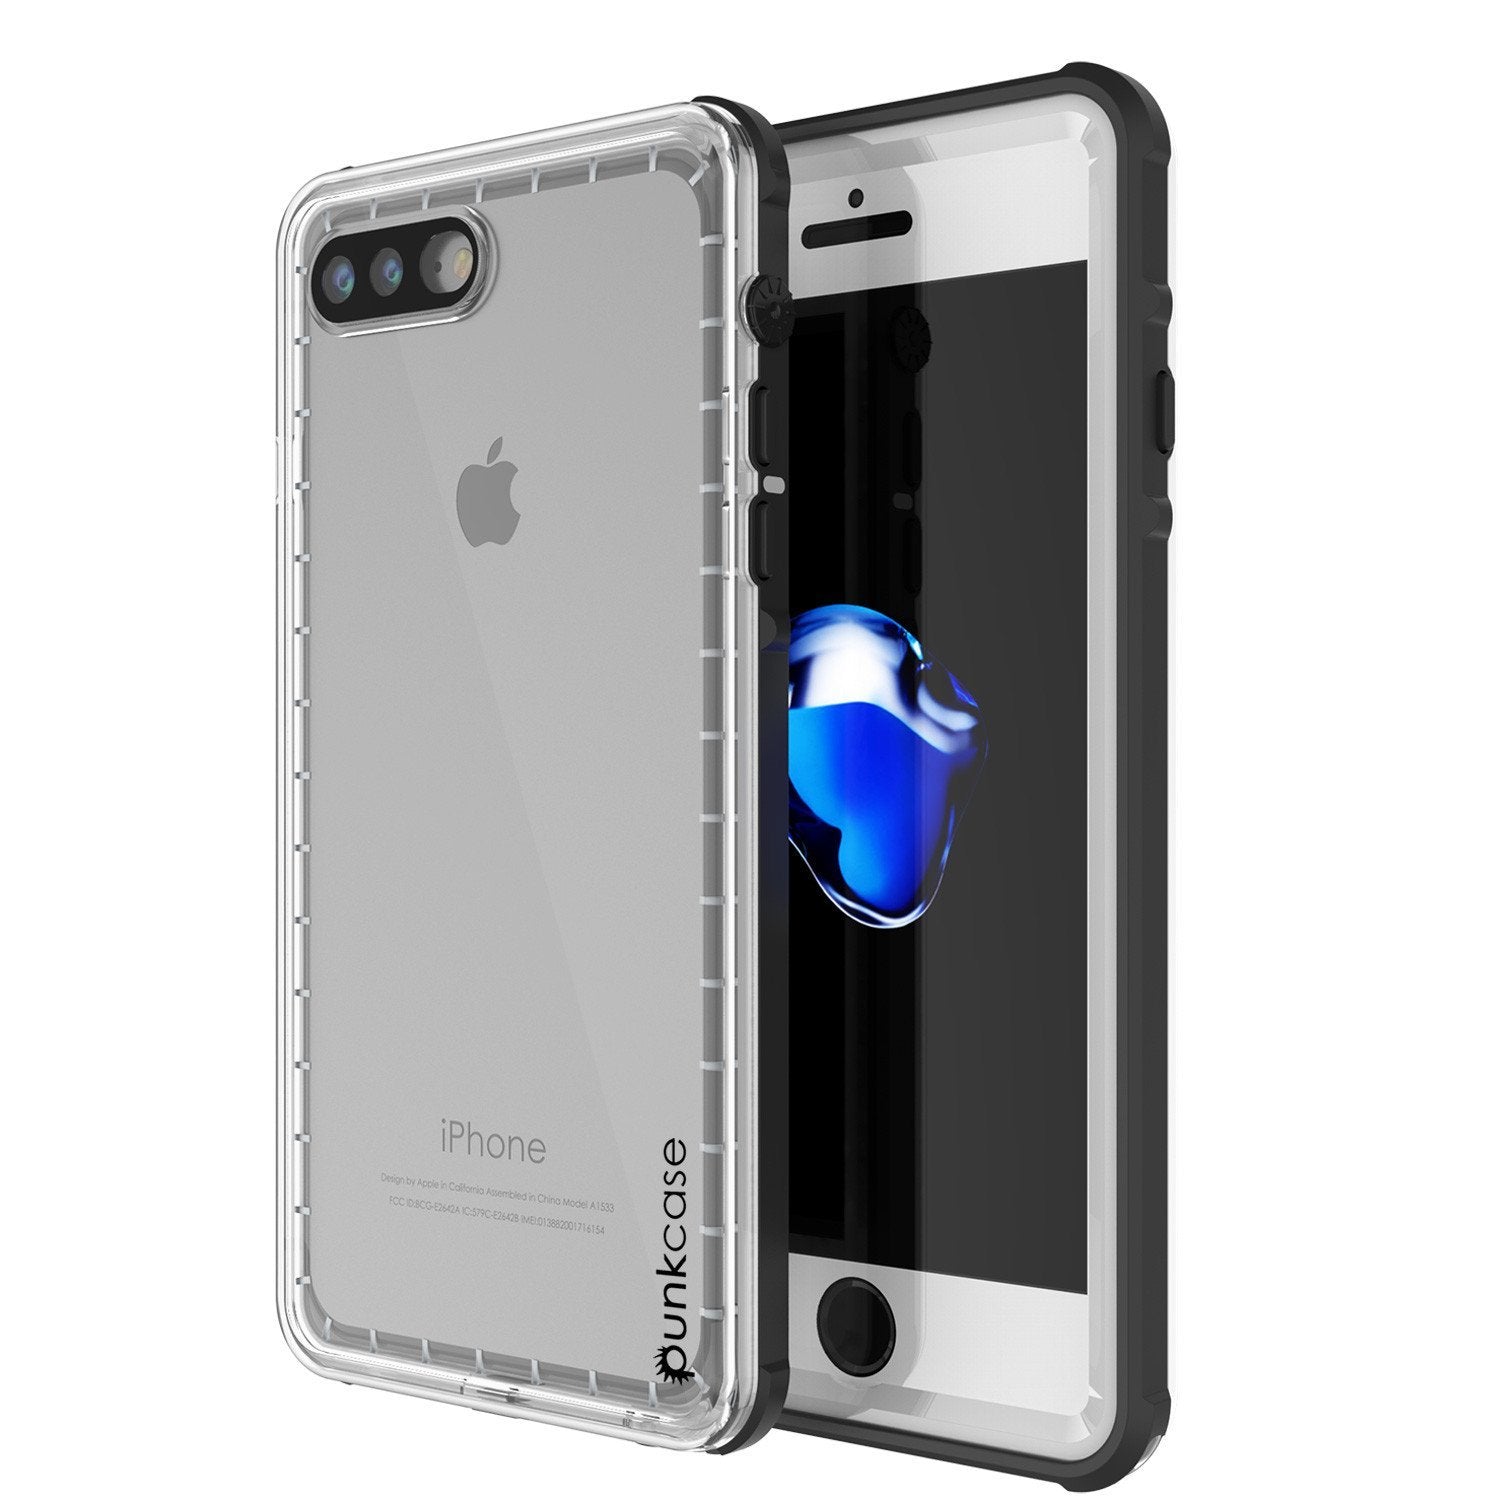 iPhone 8+ Plus Waterproof Case, PUNKcase CRYSTAL White W/ Attached Screen Protector  | Warranty (Color in image: white)